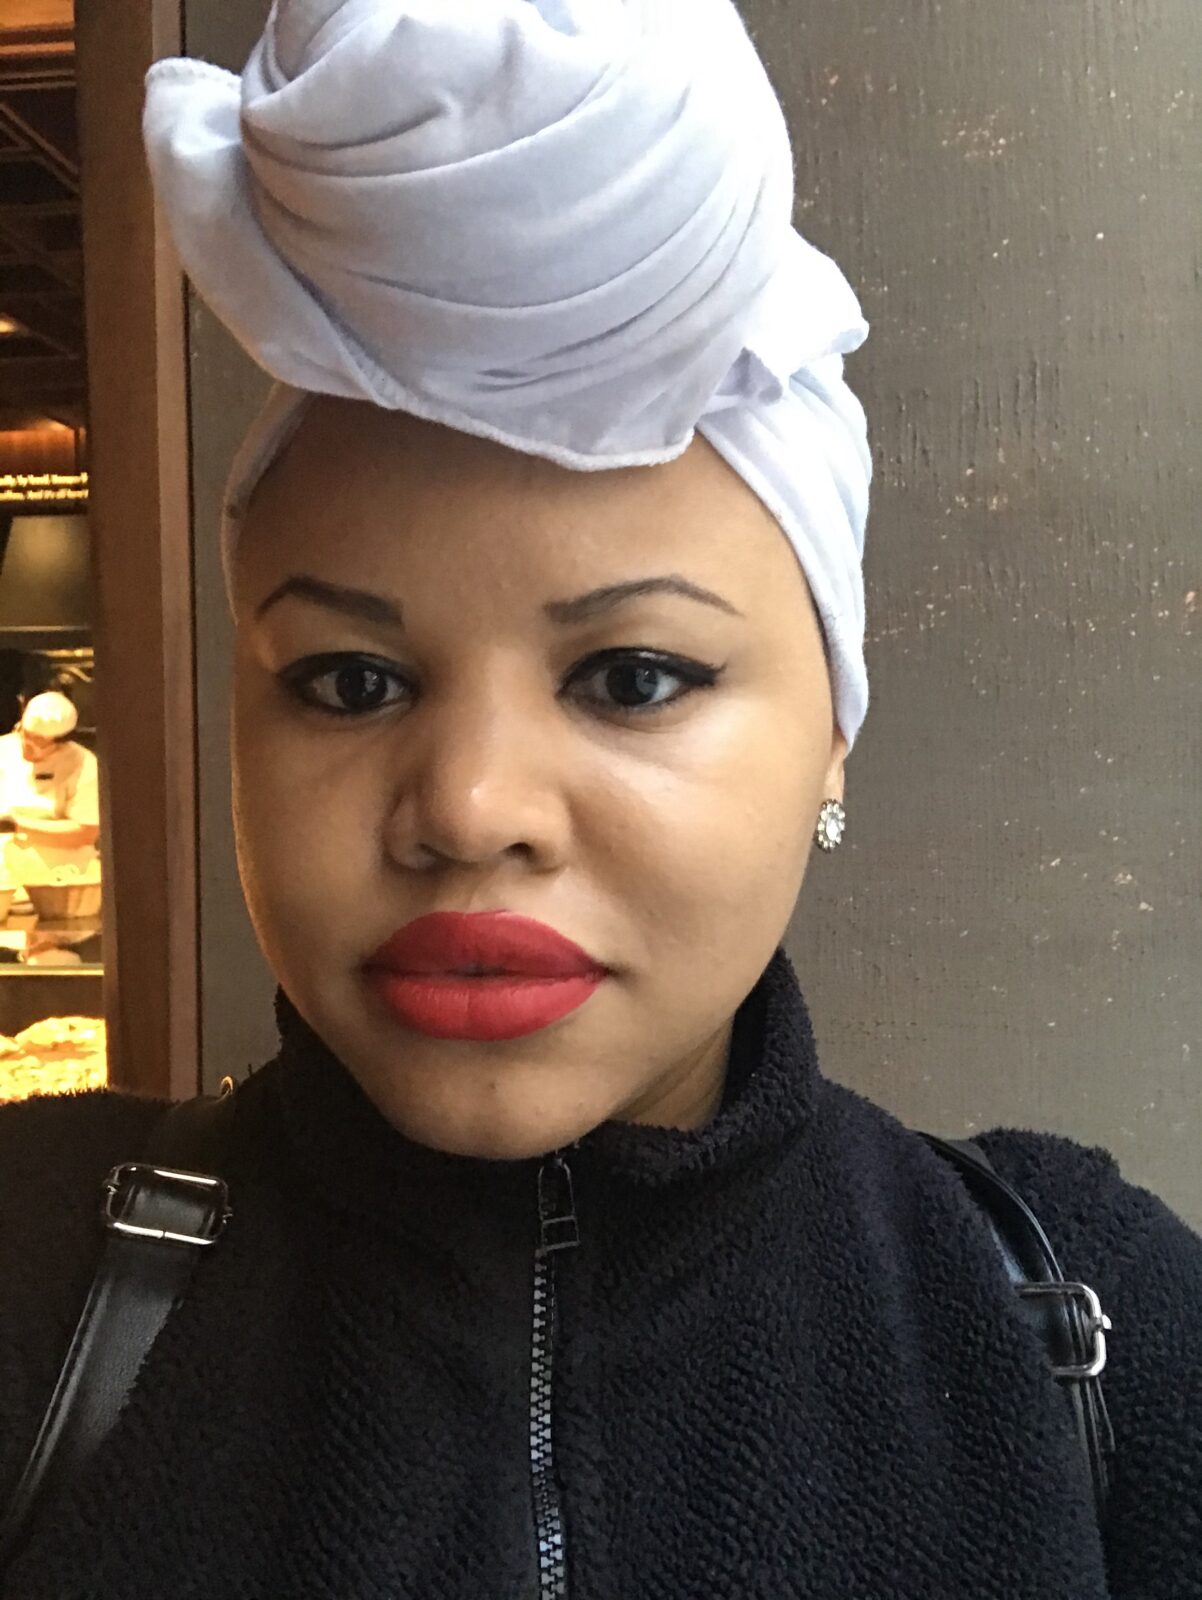 A selfie of Simone, a young black woman wearing a black zip-up sweatshirt and backpack straps. She has on red lipstick and her hair is in a white hair wrap, knotted to the front.